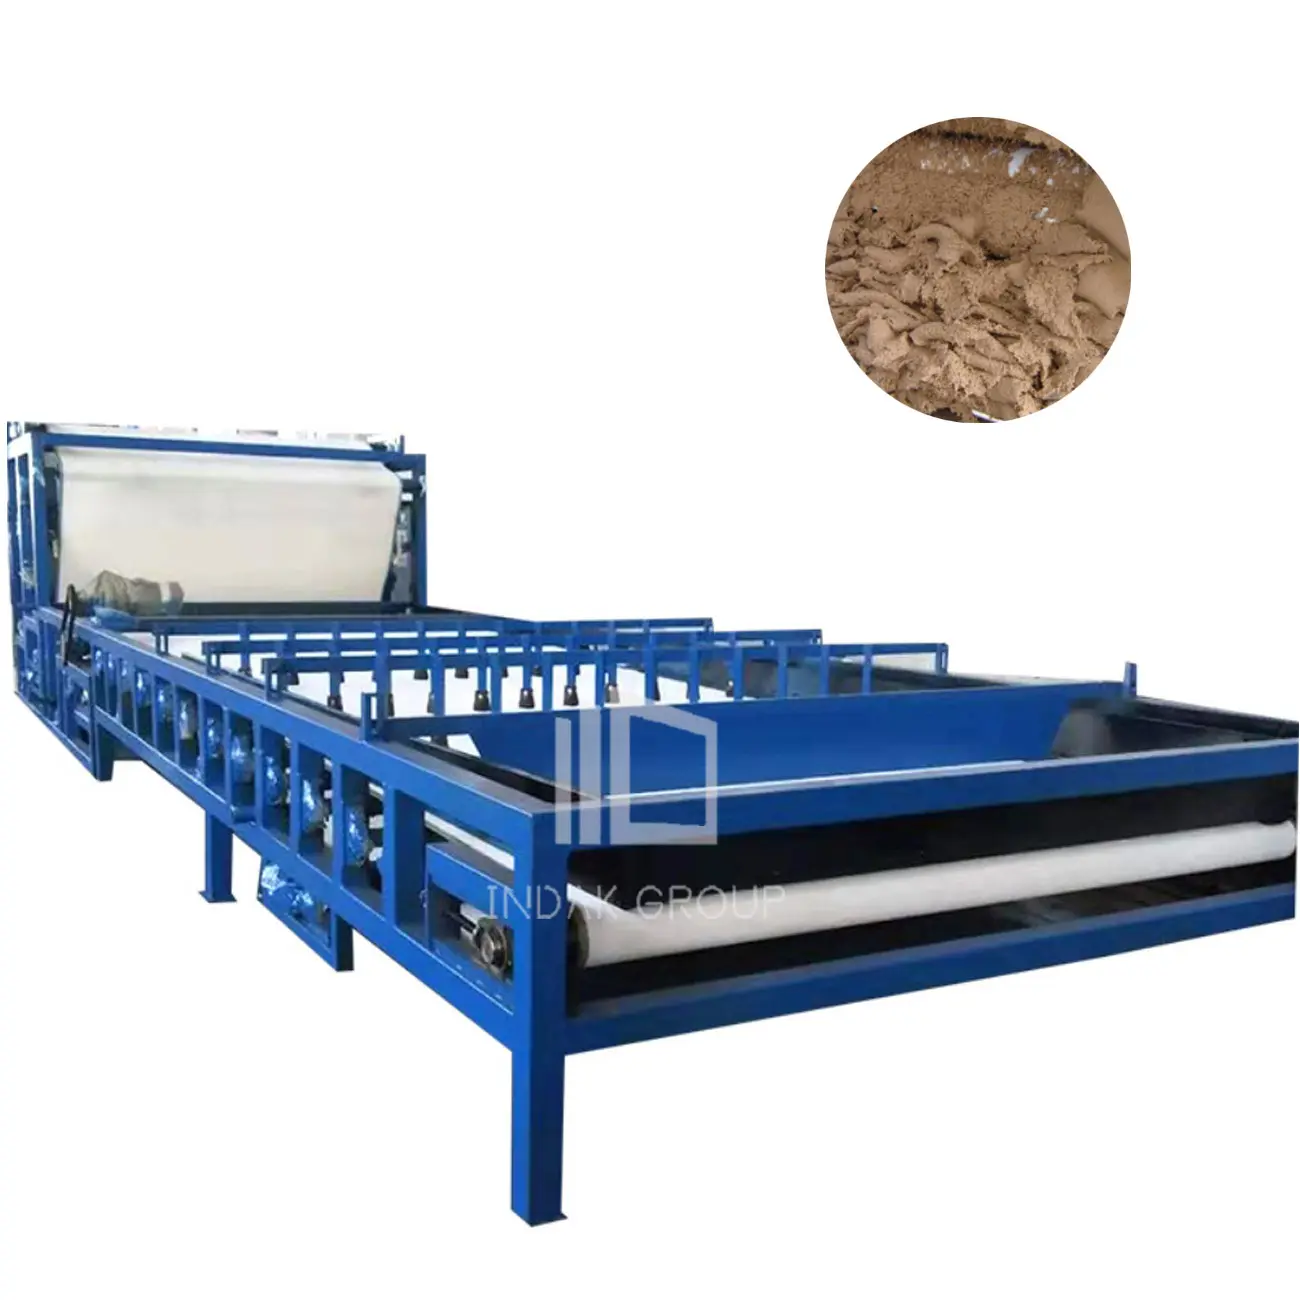 Energy saving paper making equipment for industrial use